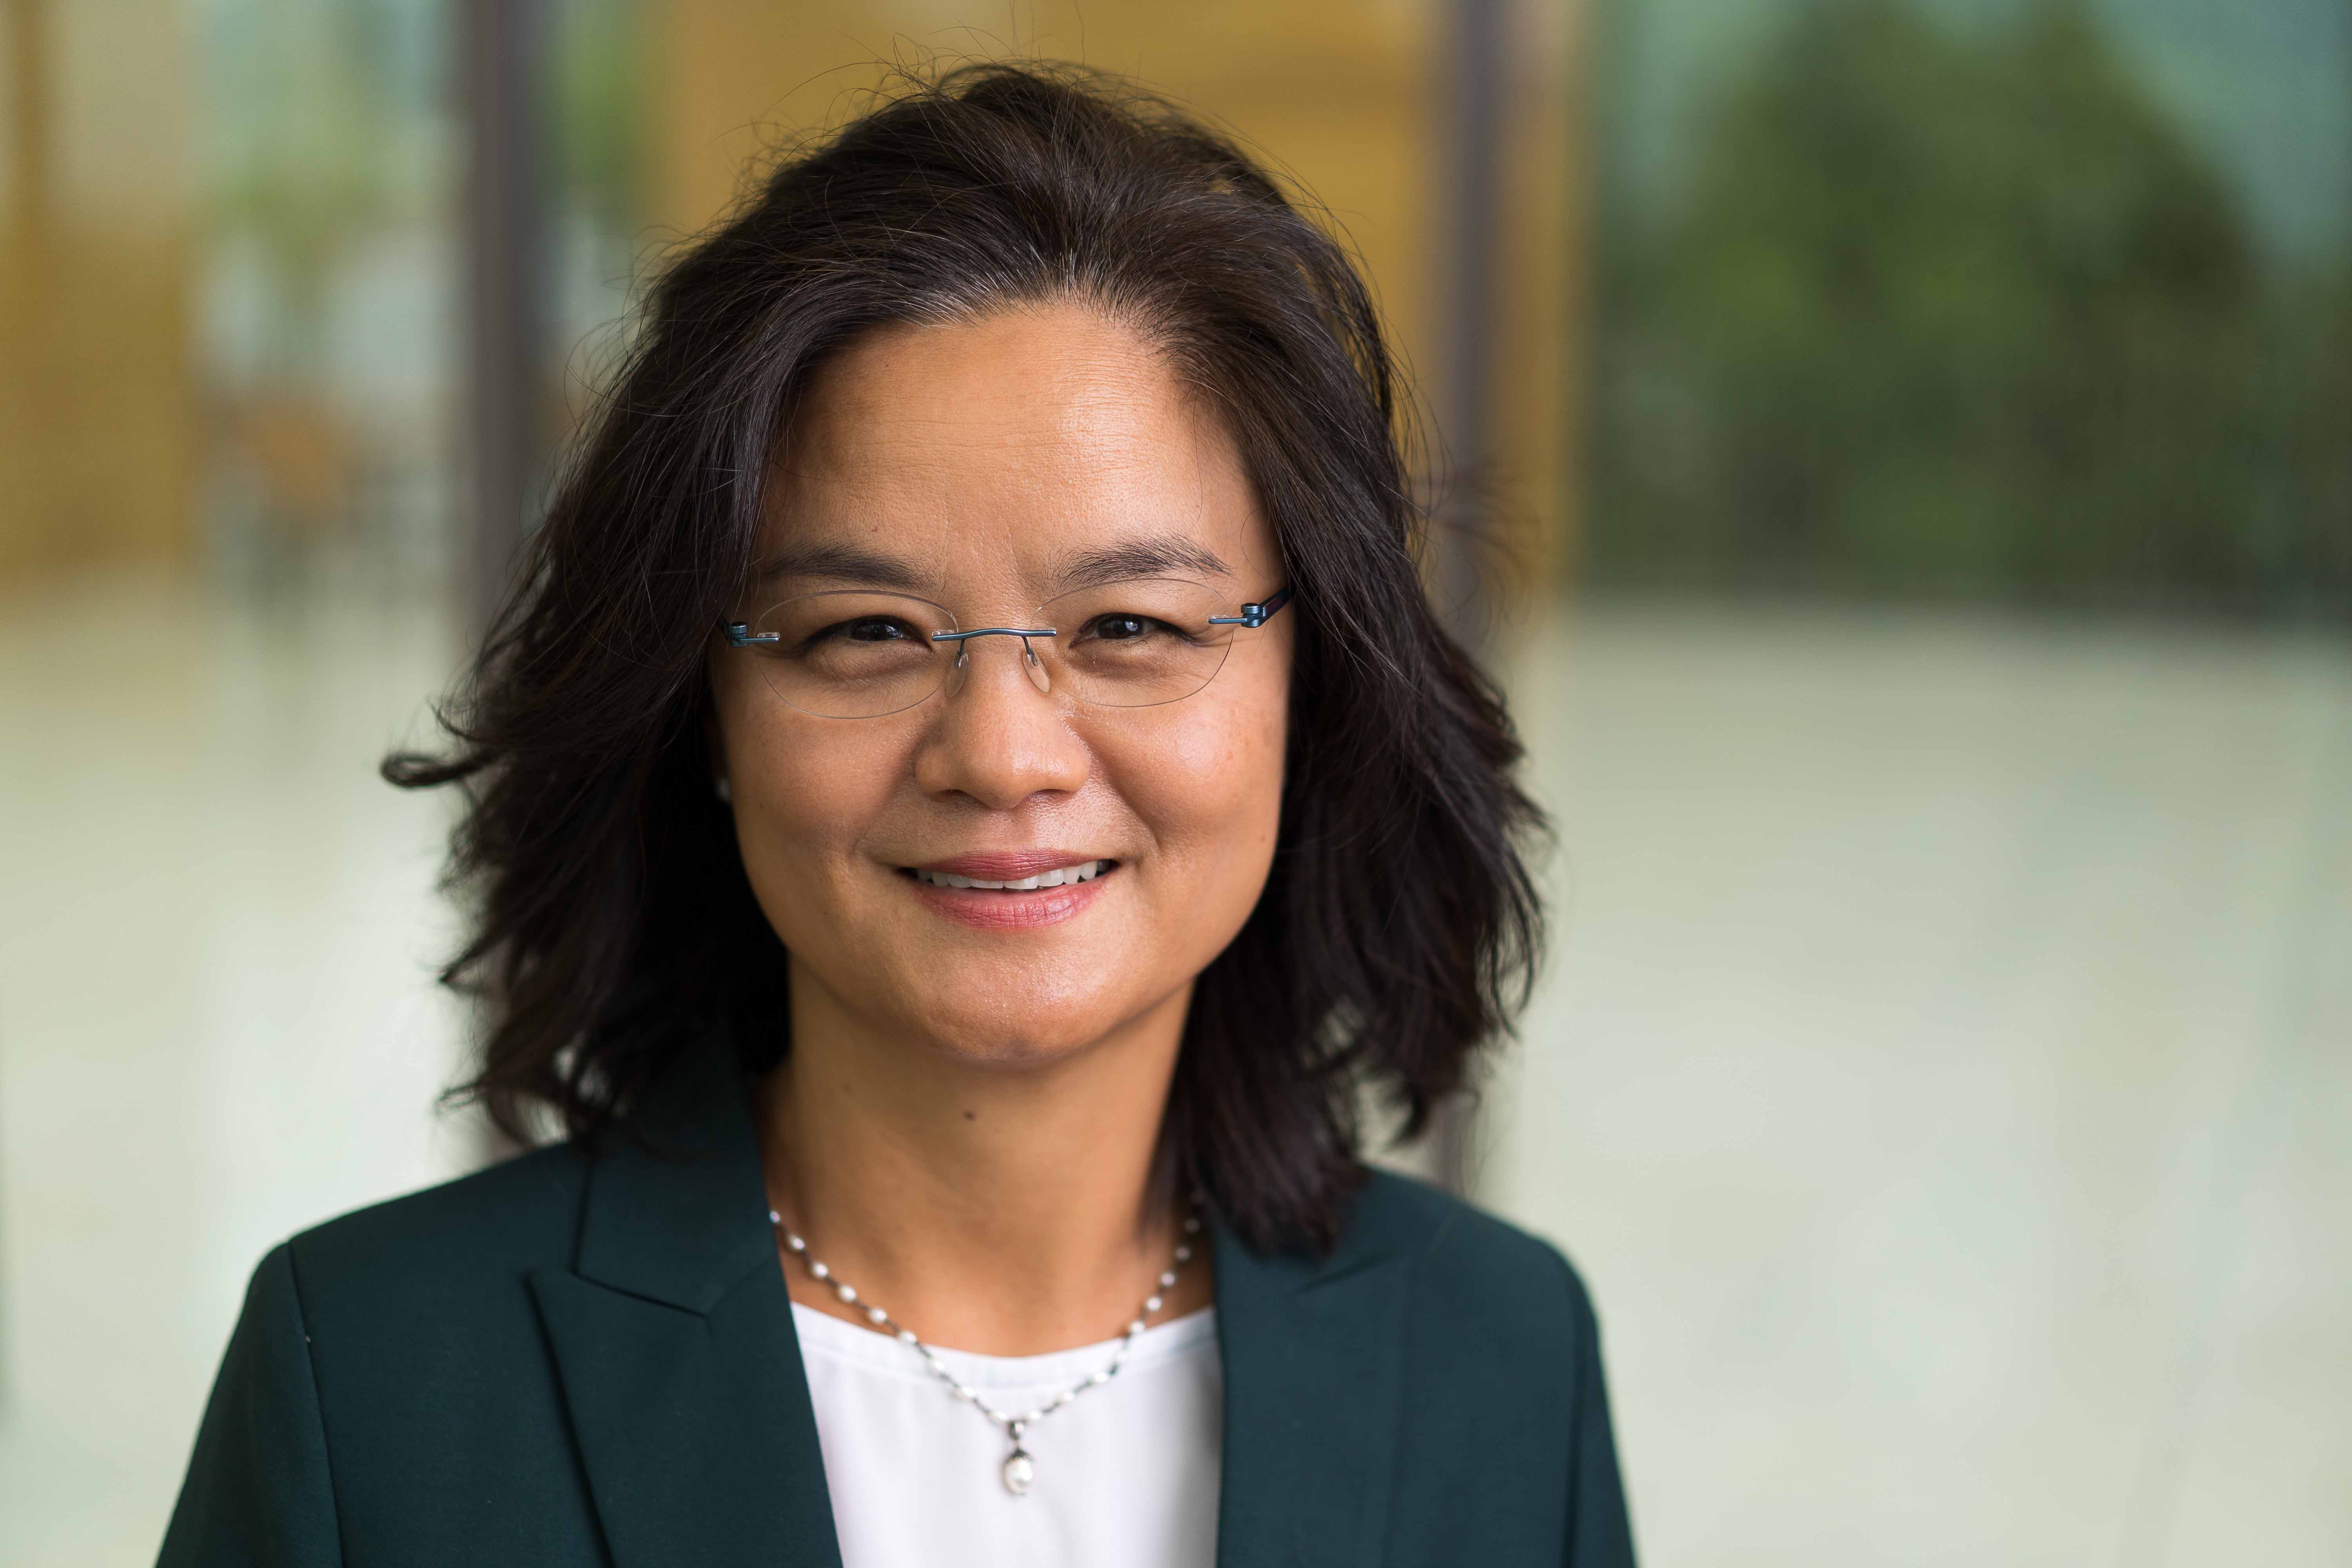 A photo of Dr. Jaehee Yi - a middle aged Asian woman wearing glass with indoor architectural details in the background